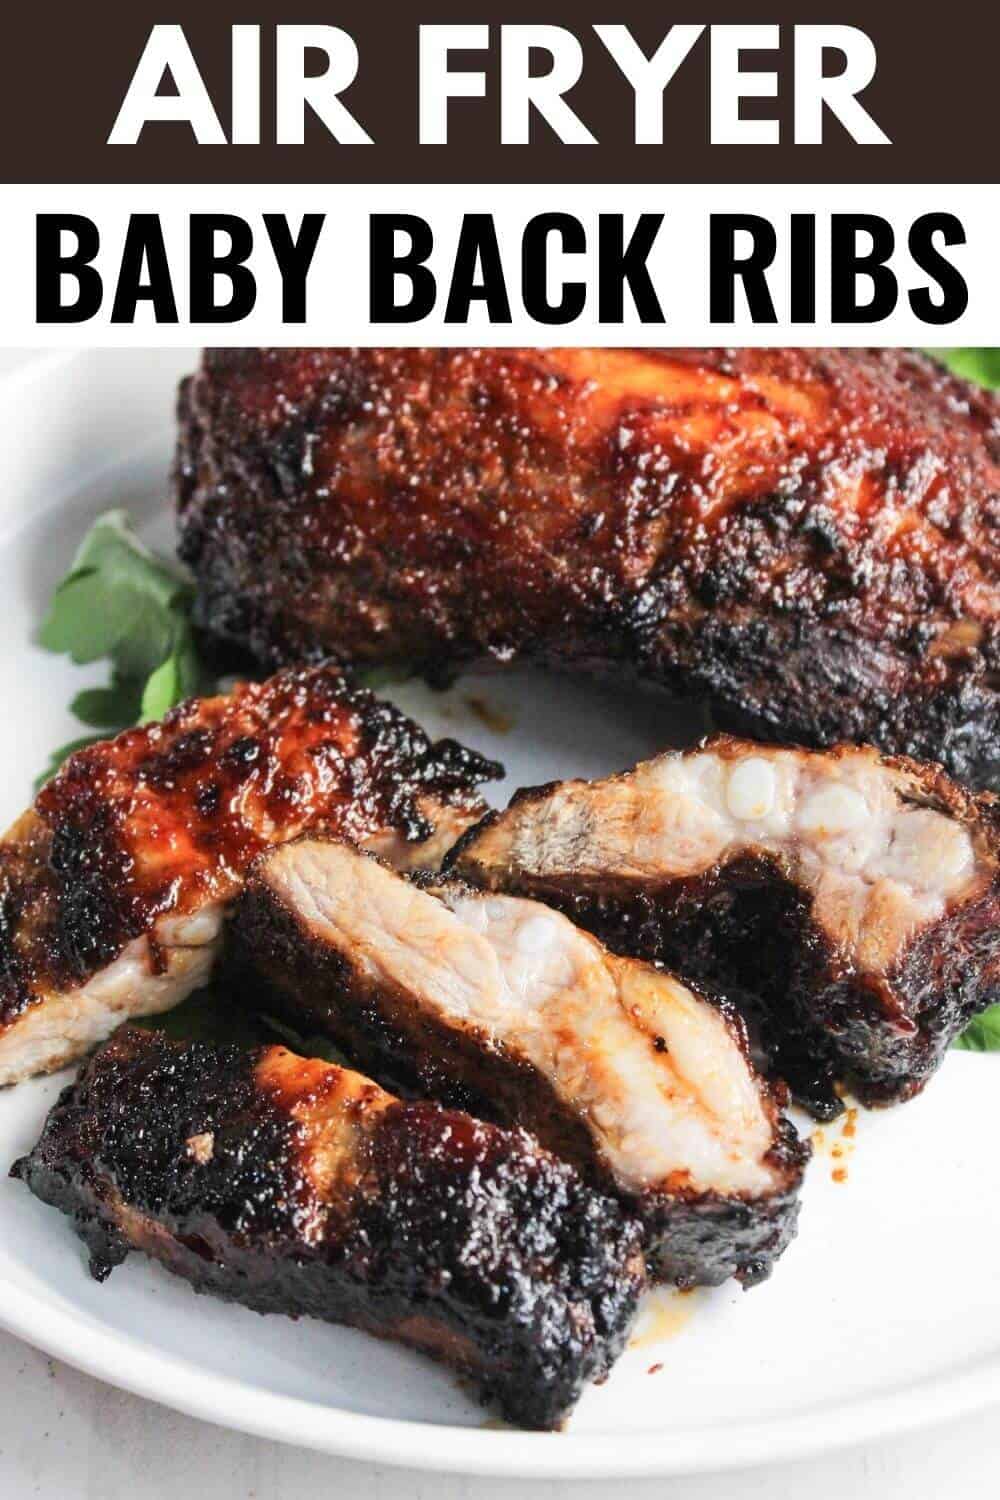 Air fryer baby back ribs on a plate.